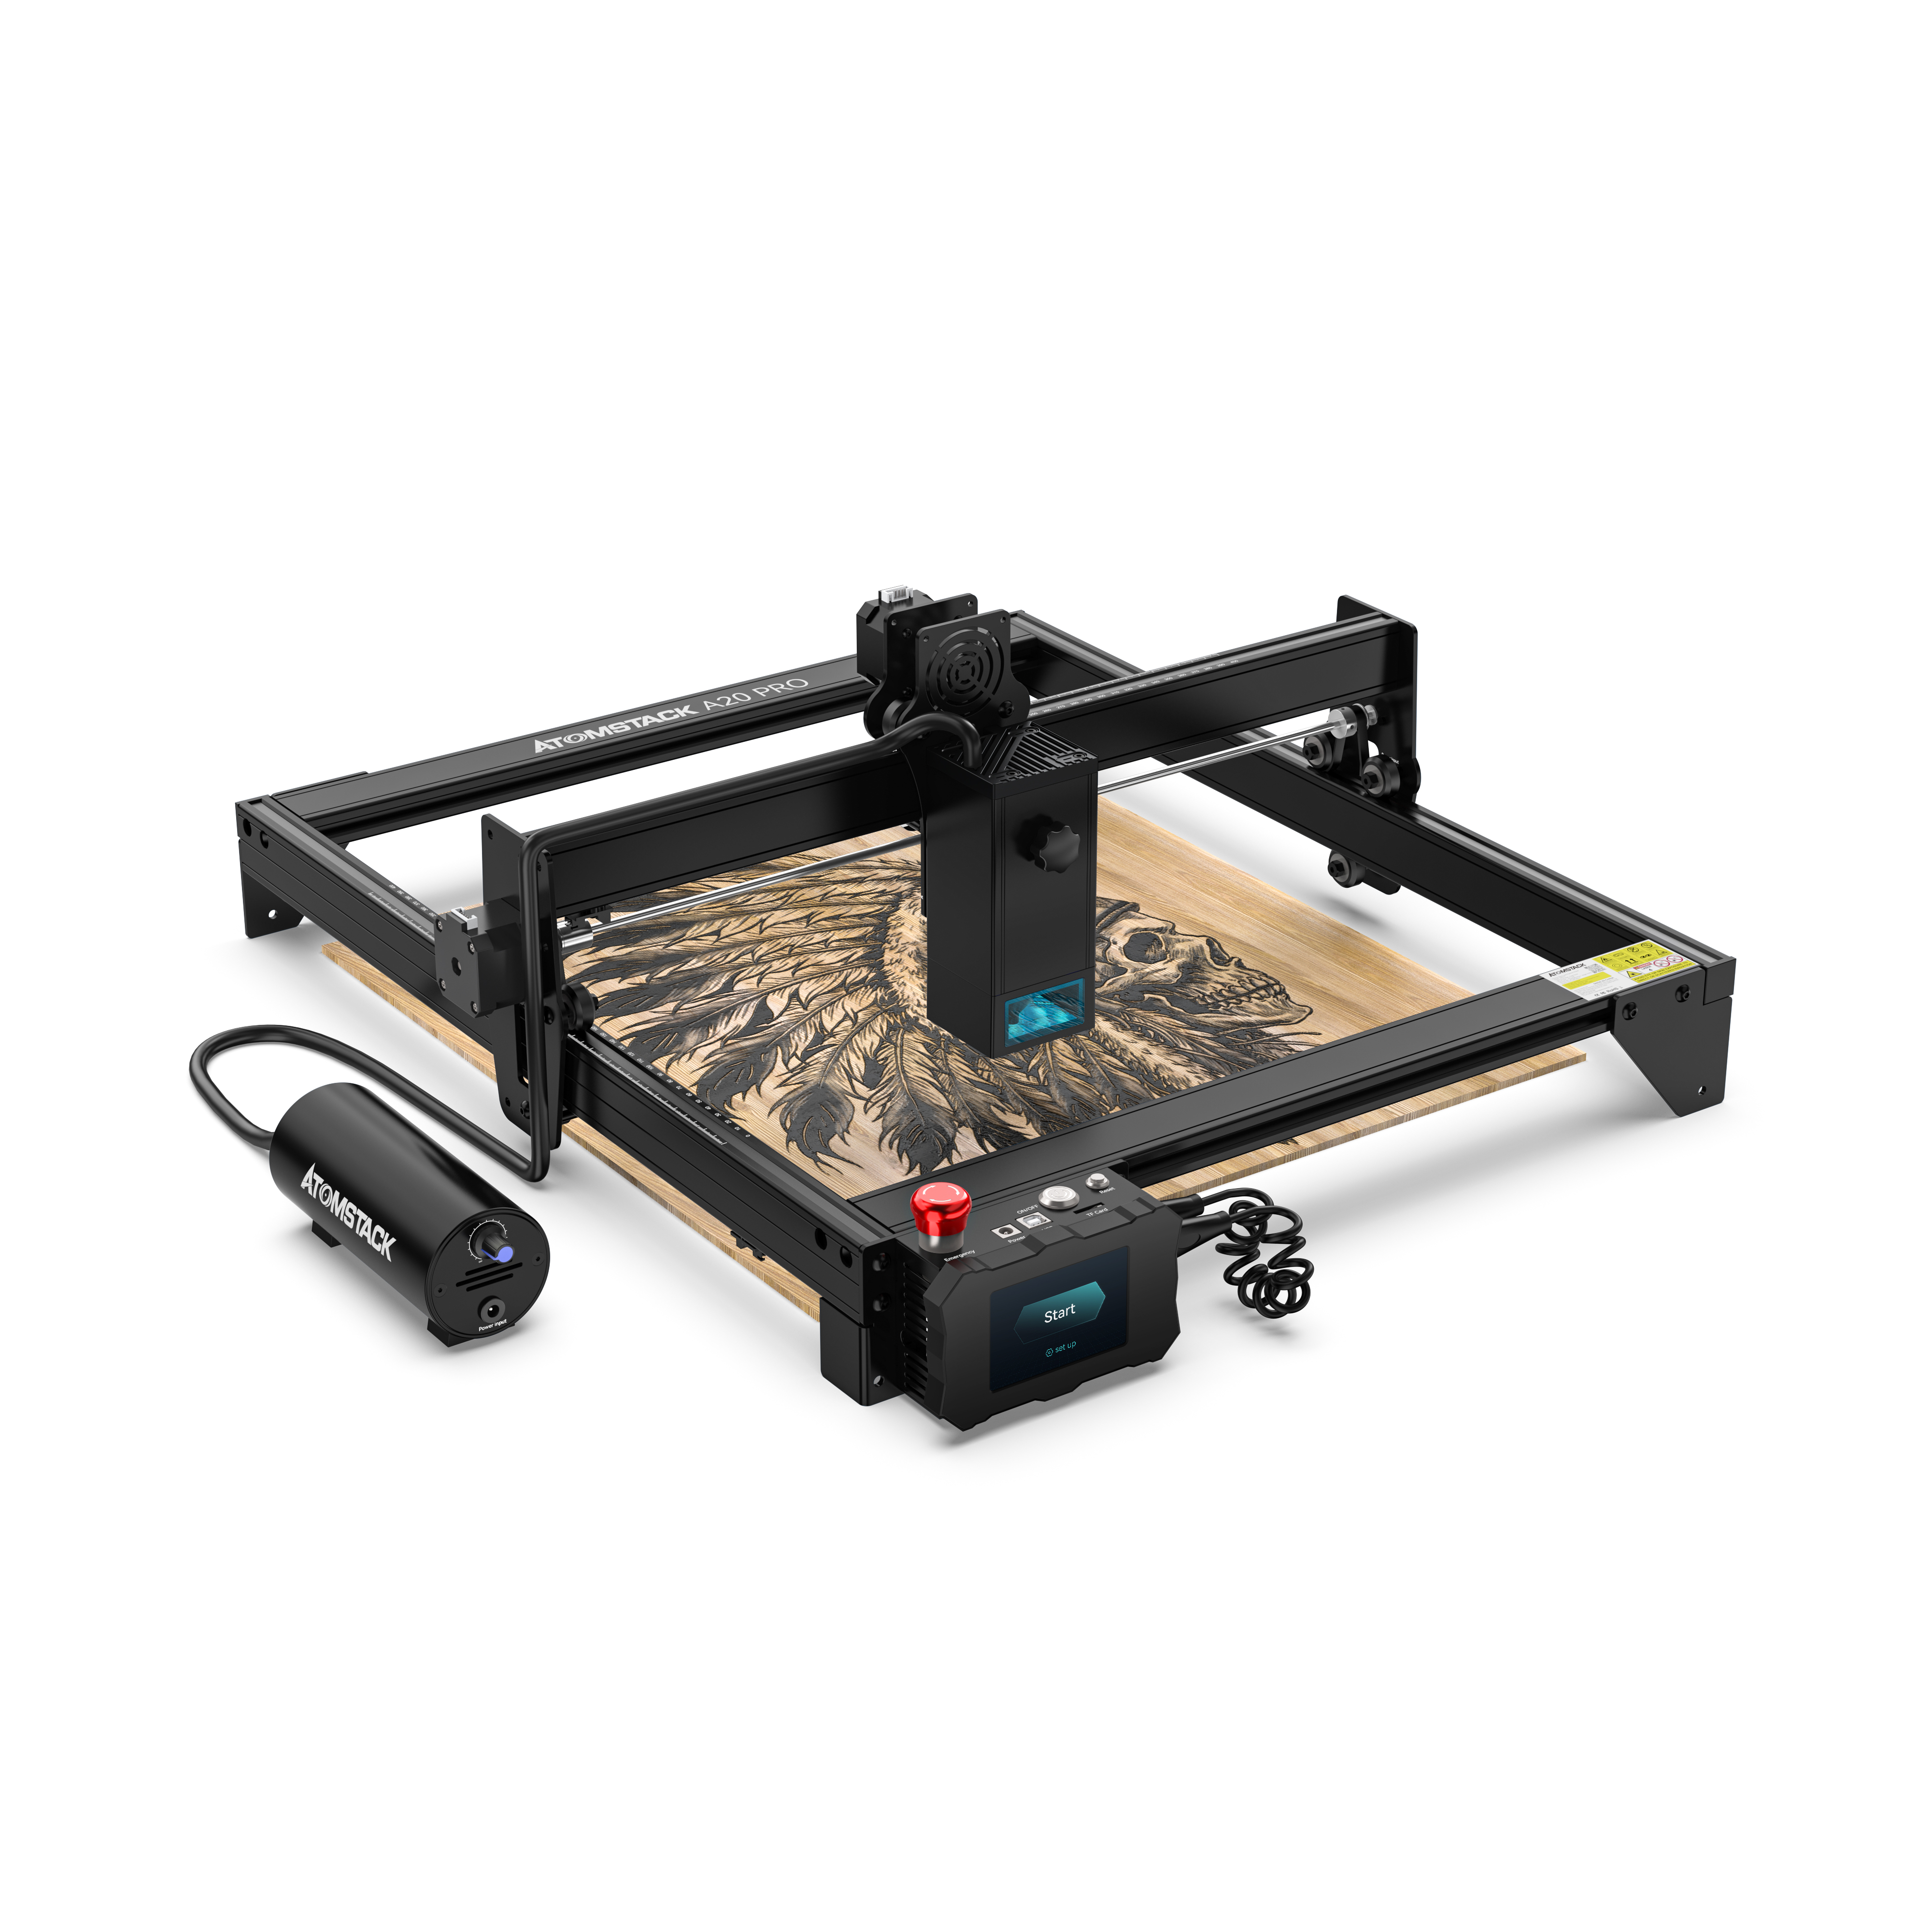 [Pre-order] Atomstack A20 / X20 Pro 130W Quad-Laser Engraving and Cutting Machine Built-in Air Assist System